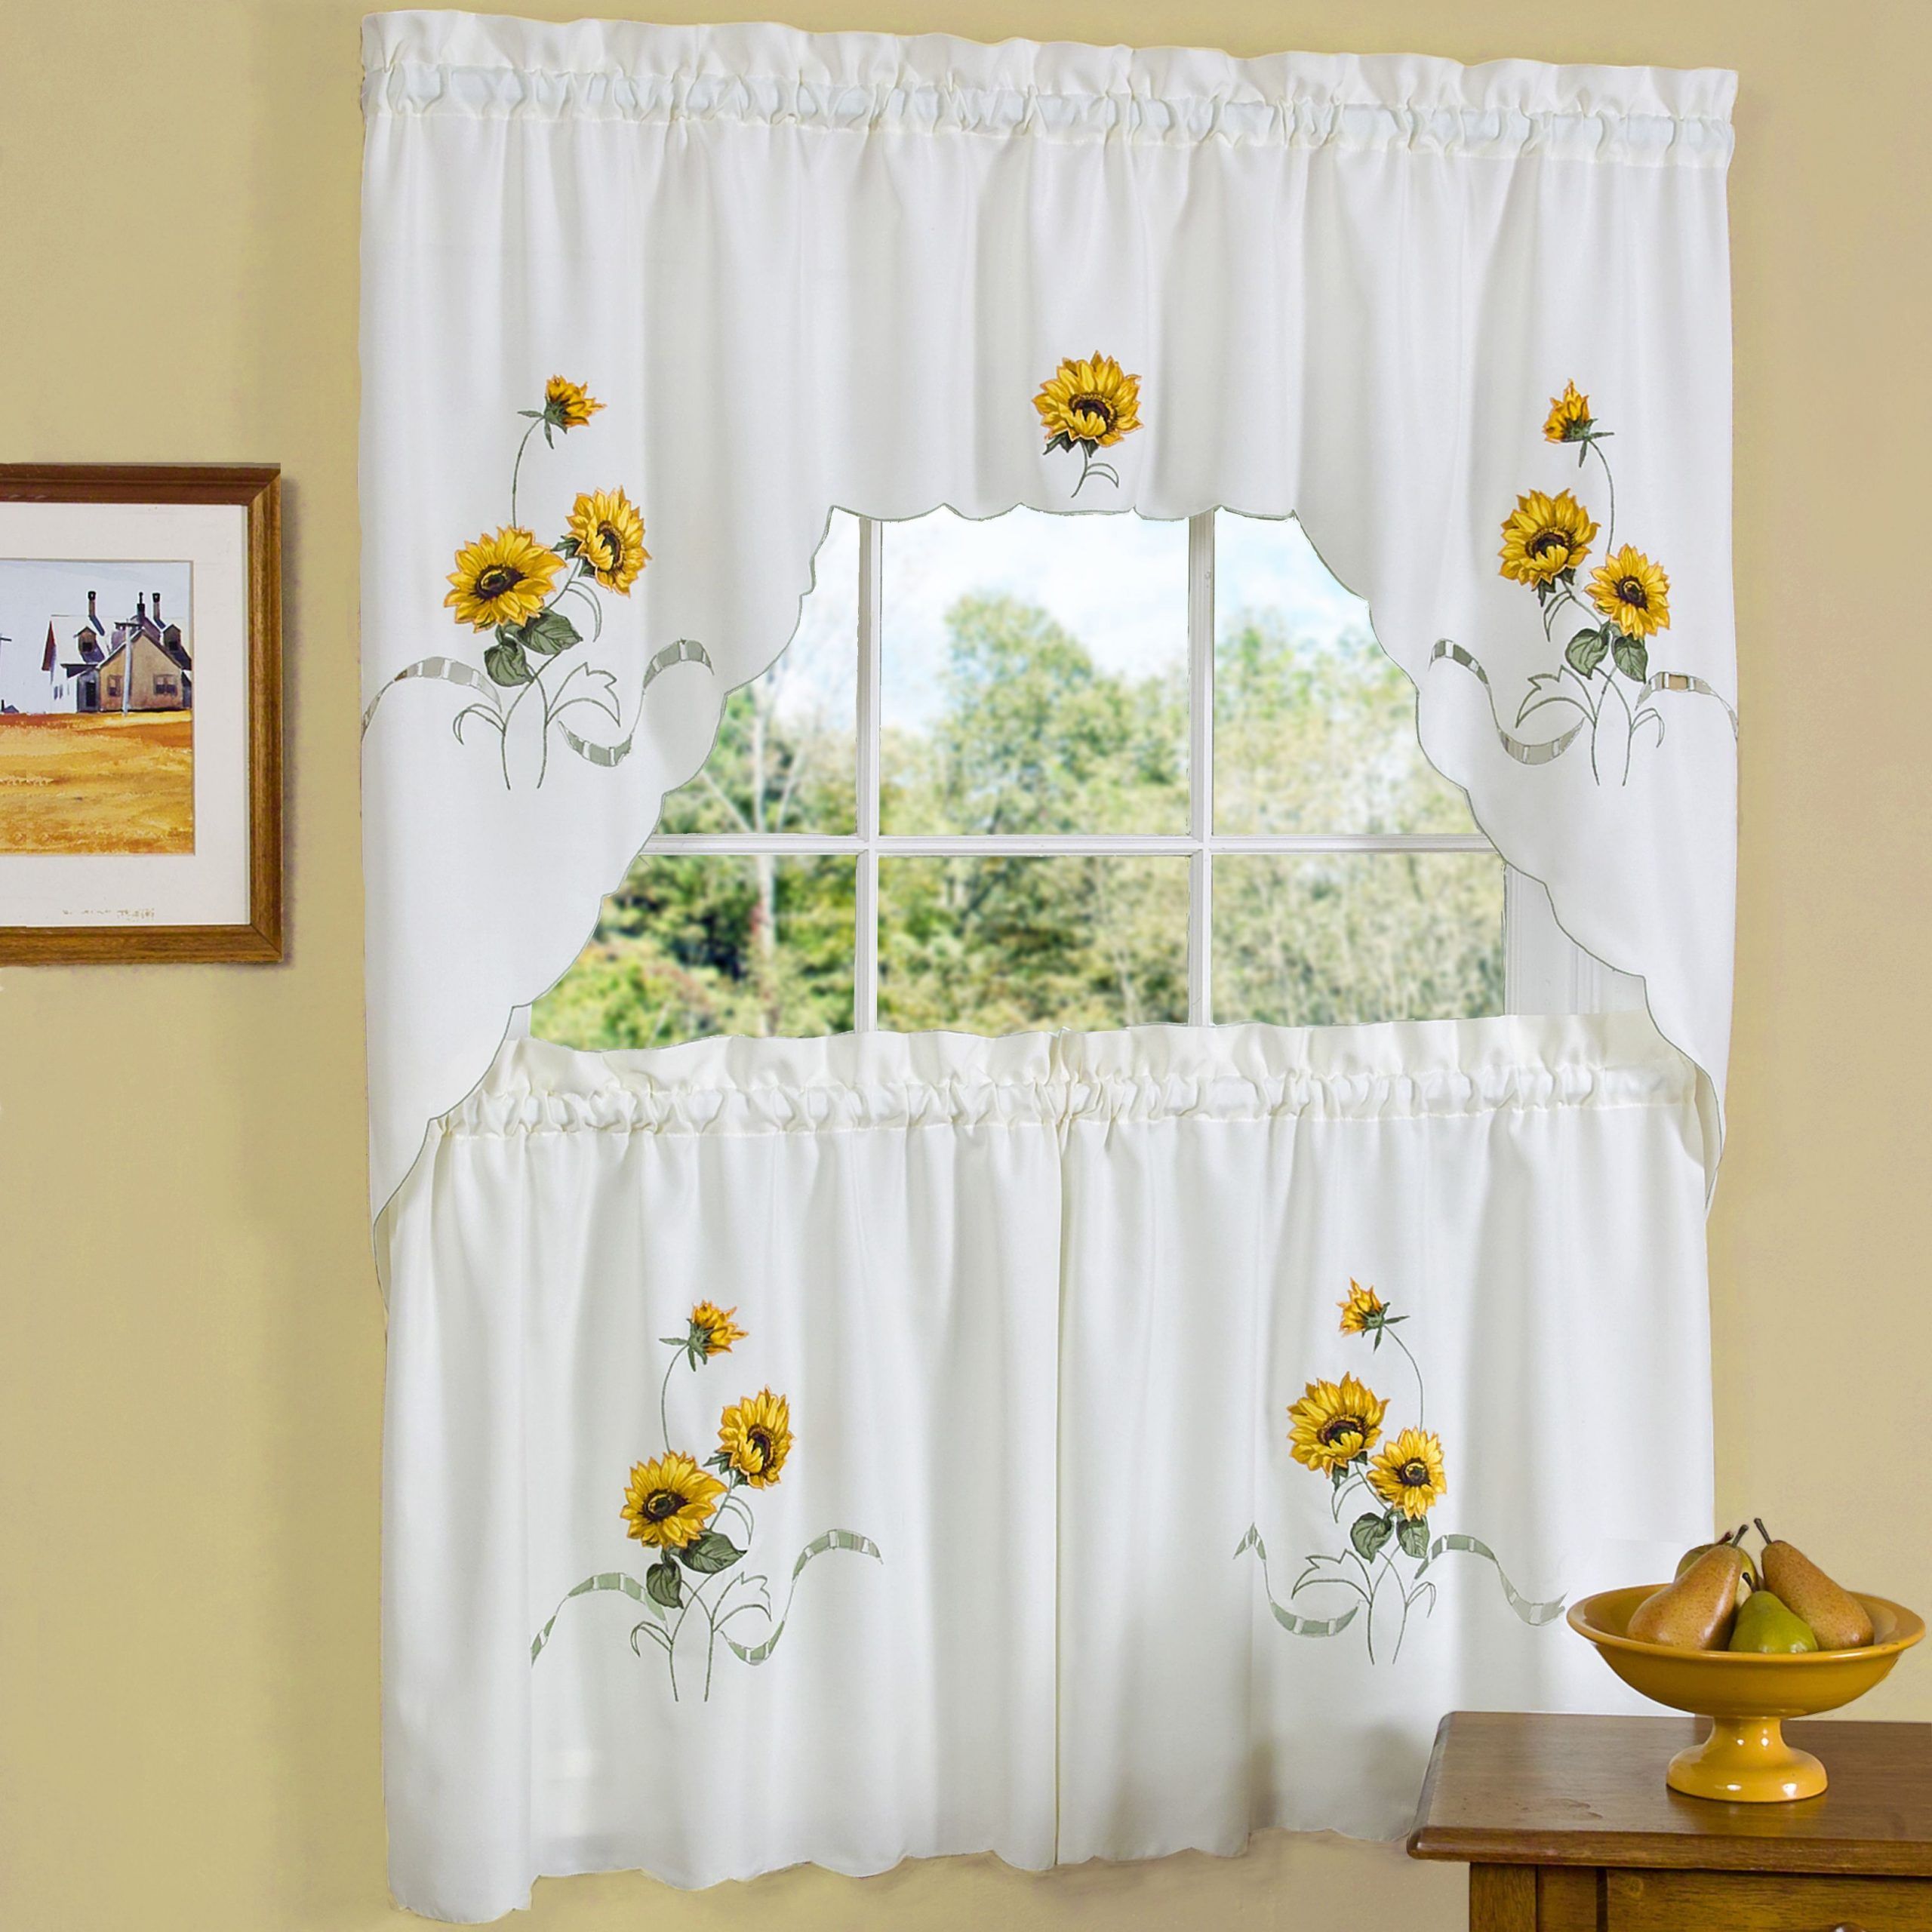 Traditional Two Piece Tailored Tier And Swag Window Curtains Regarding Traditional Tailored Tier And Swag Window Curtains Sets With Ornate Flower Garden Print (View 6 of 20)